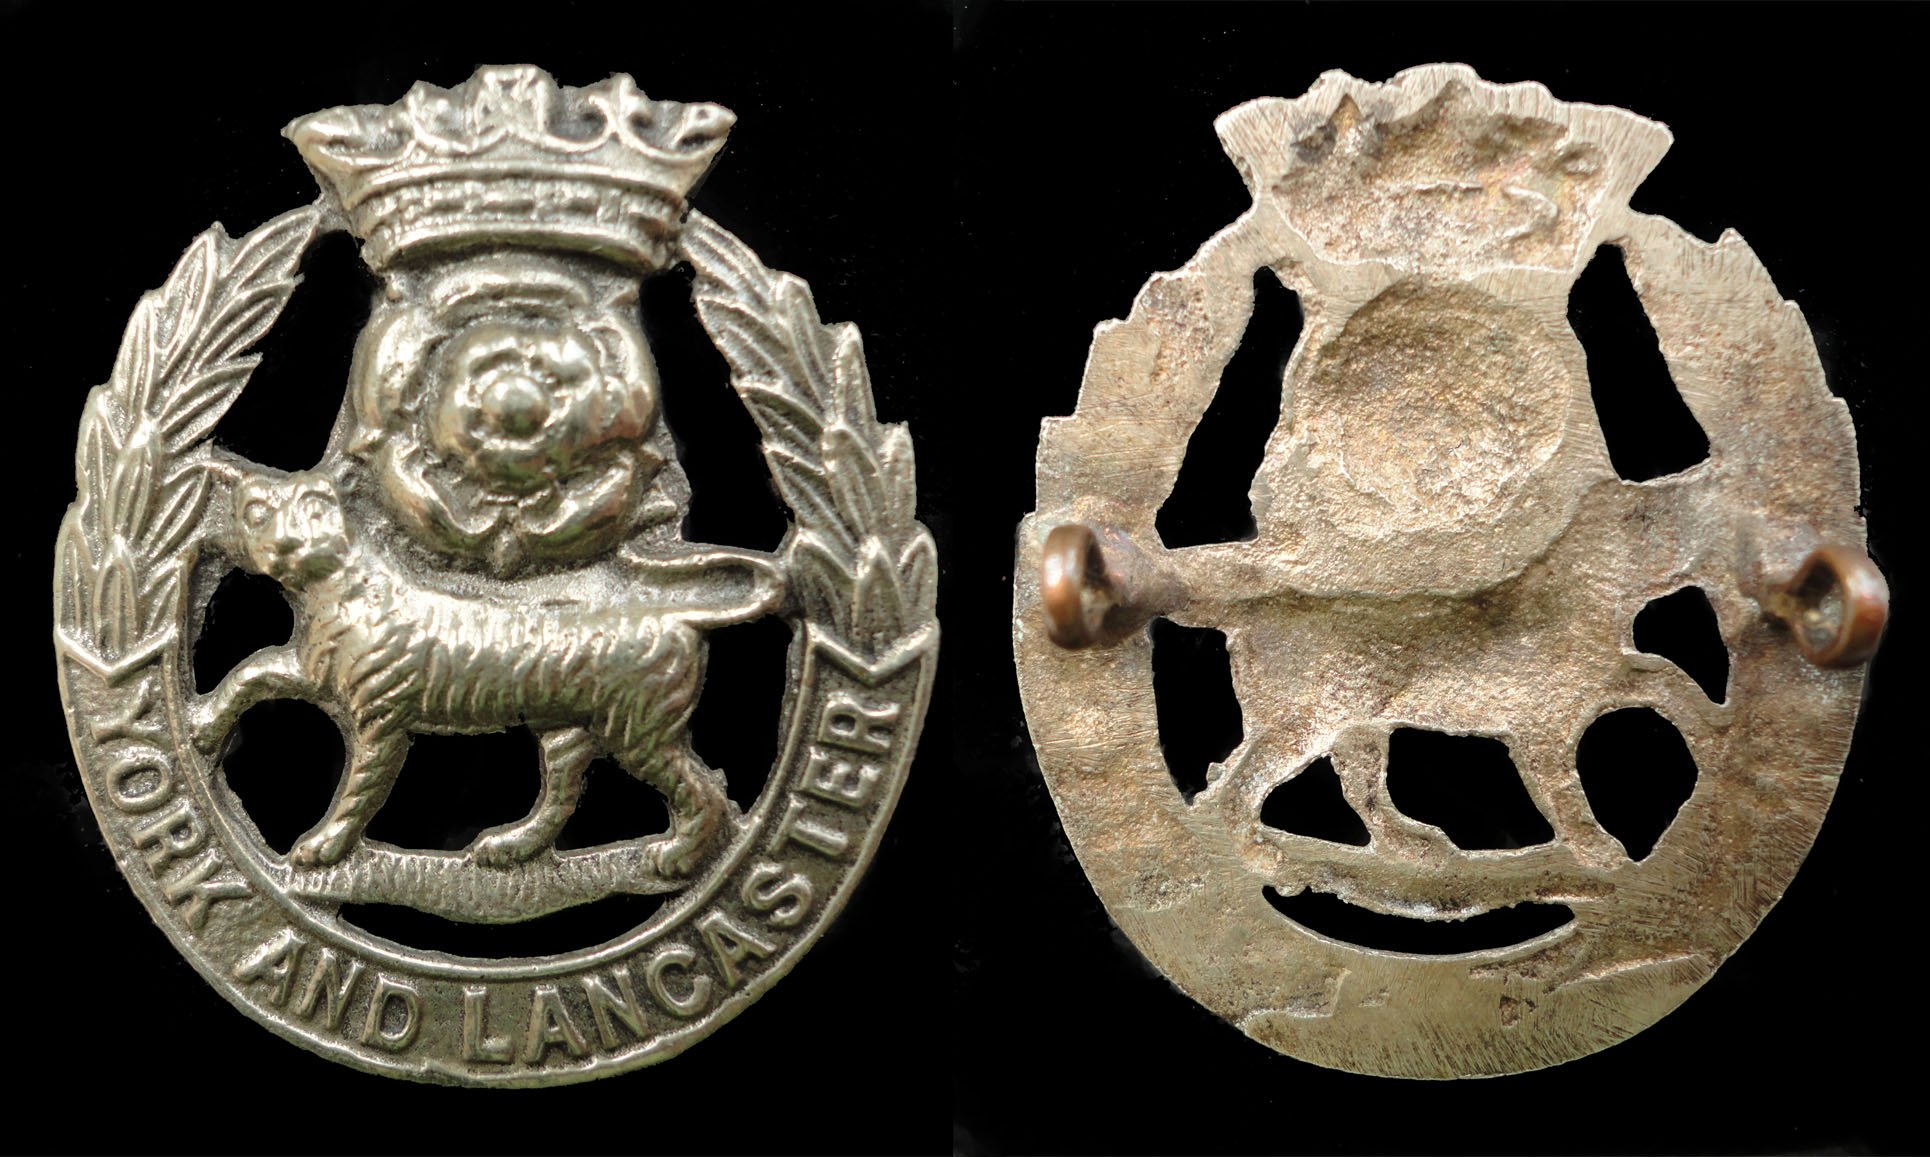 A Sand Cast Other Ranks Badge